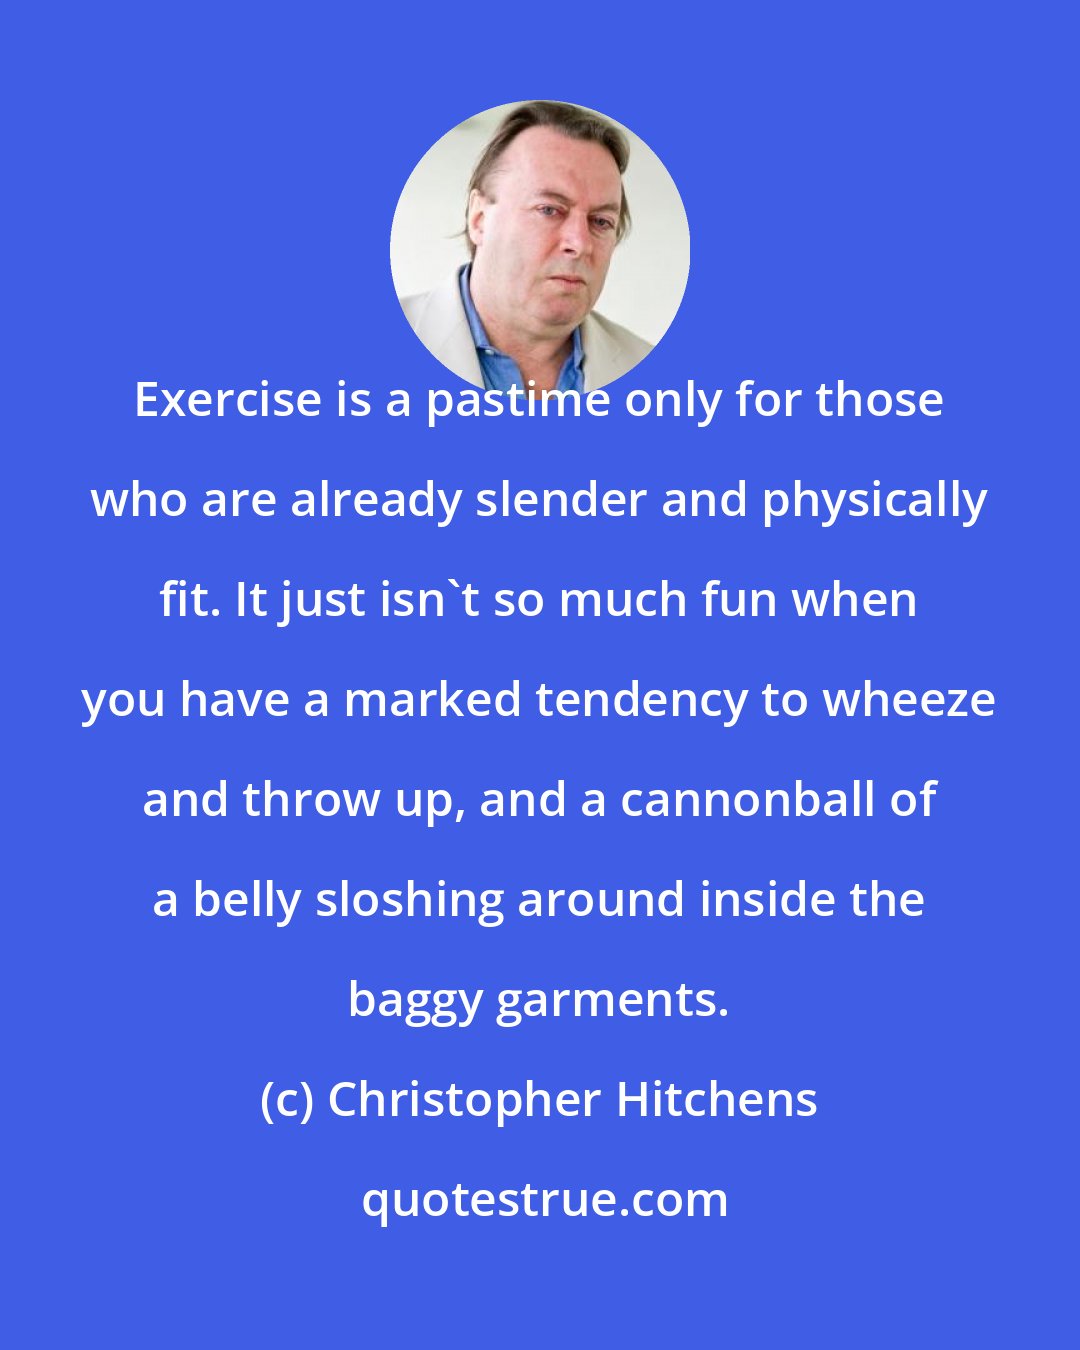 Christopher Hitchens: Exercise is a pastime only for those who are already slender and physically fit. It just isn't so much fun when you have a marked tendency to wheeze and throw up, and a cannonball of a belly sloshing around inside the baggy garments.